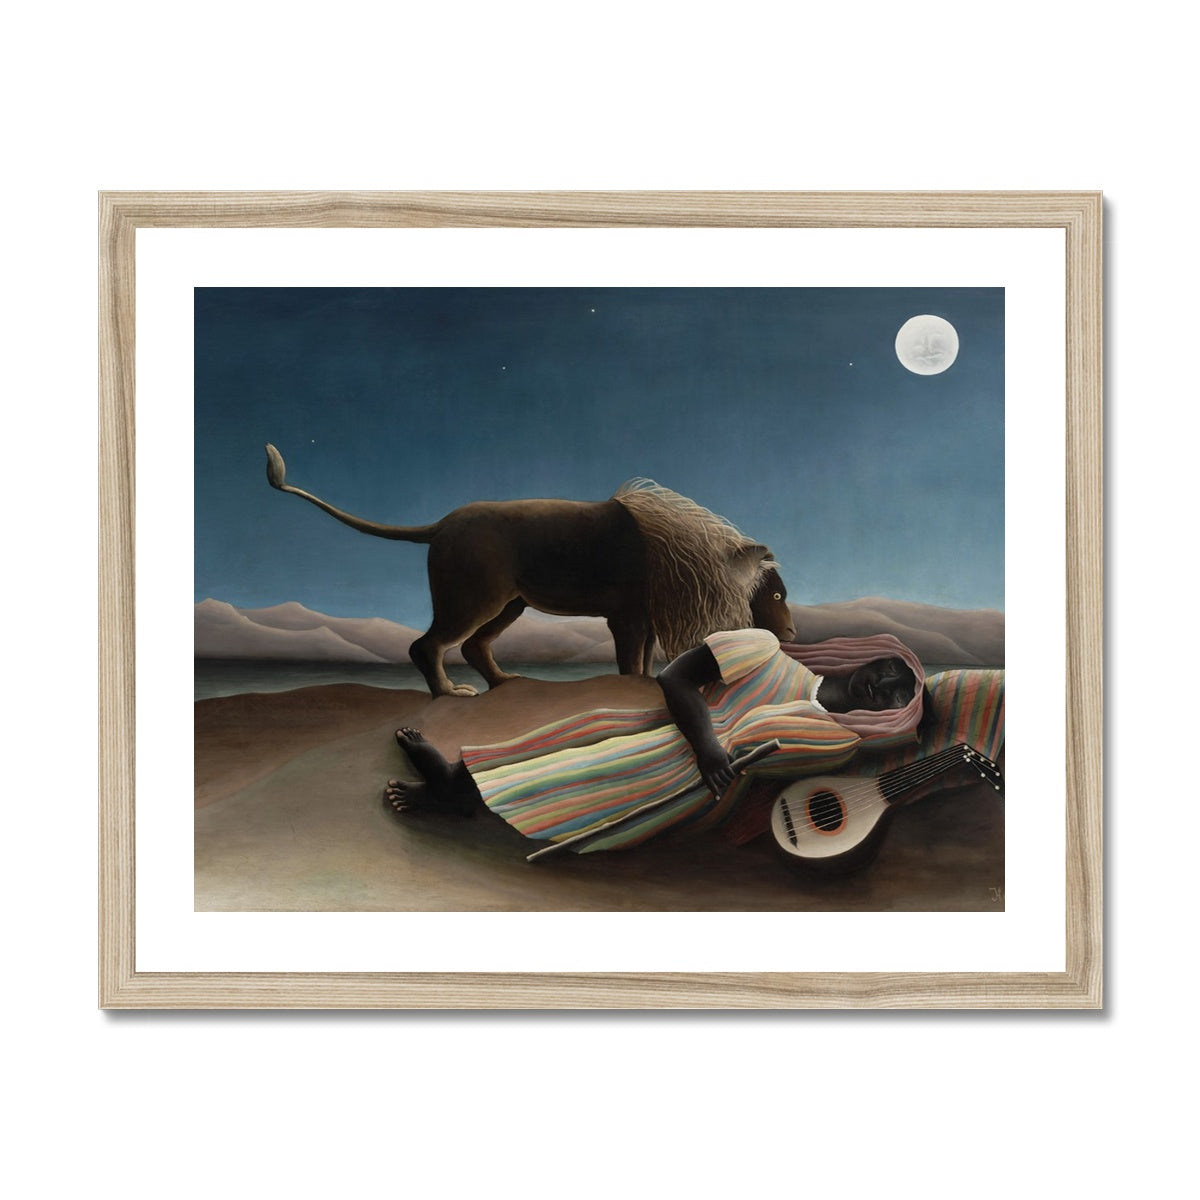 Rousseau - The Sleeping Gypsy gerahmtes Poster - Atopurinto